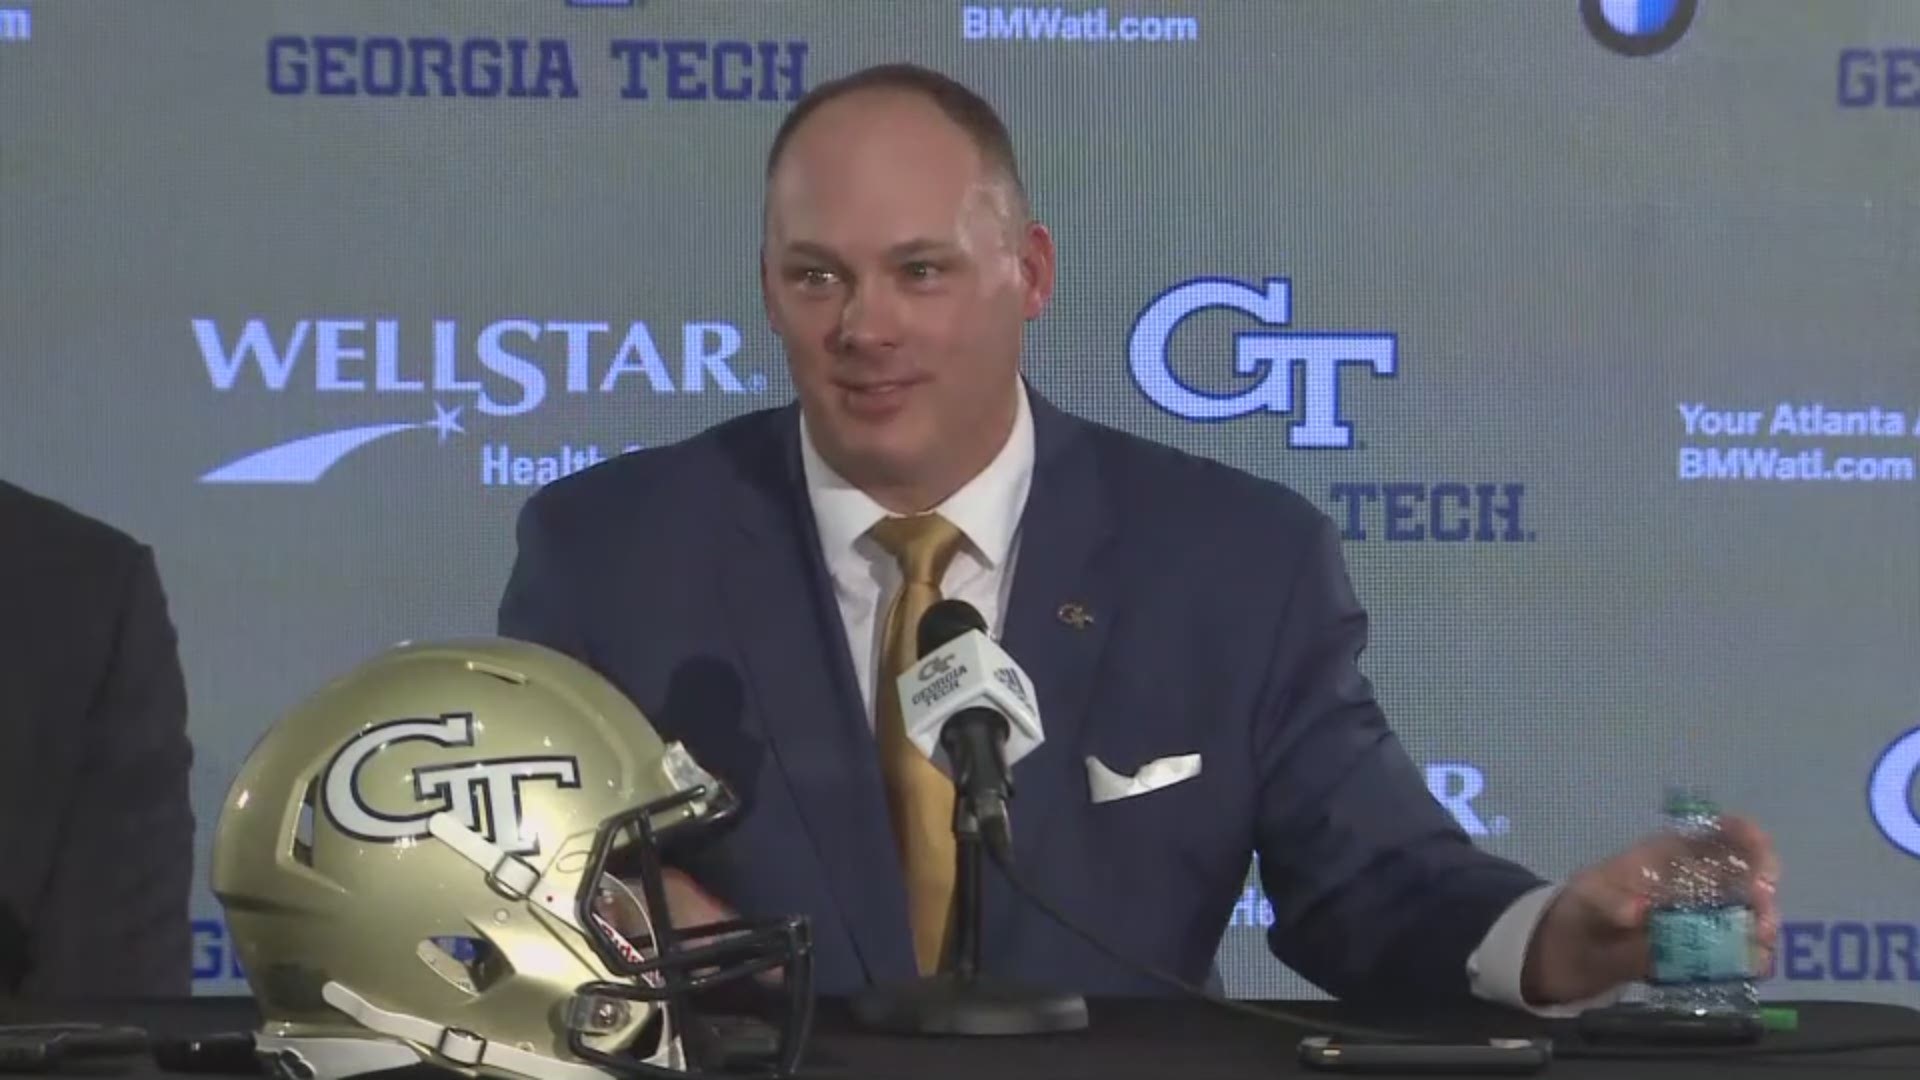 The newly crown head coach might have ruffled some feathers in ACC circles ... by saying Georgia Tech players will have a chance to get a 'meaningful degree.'